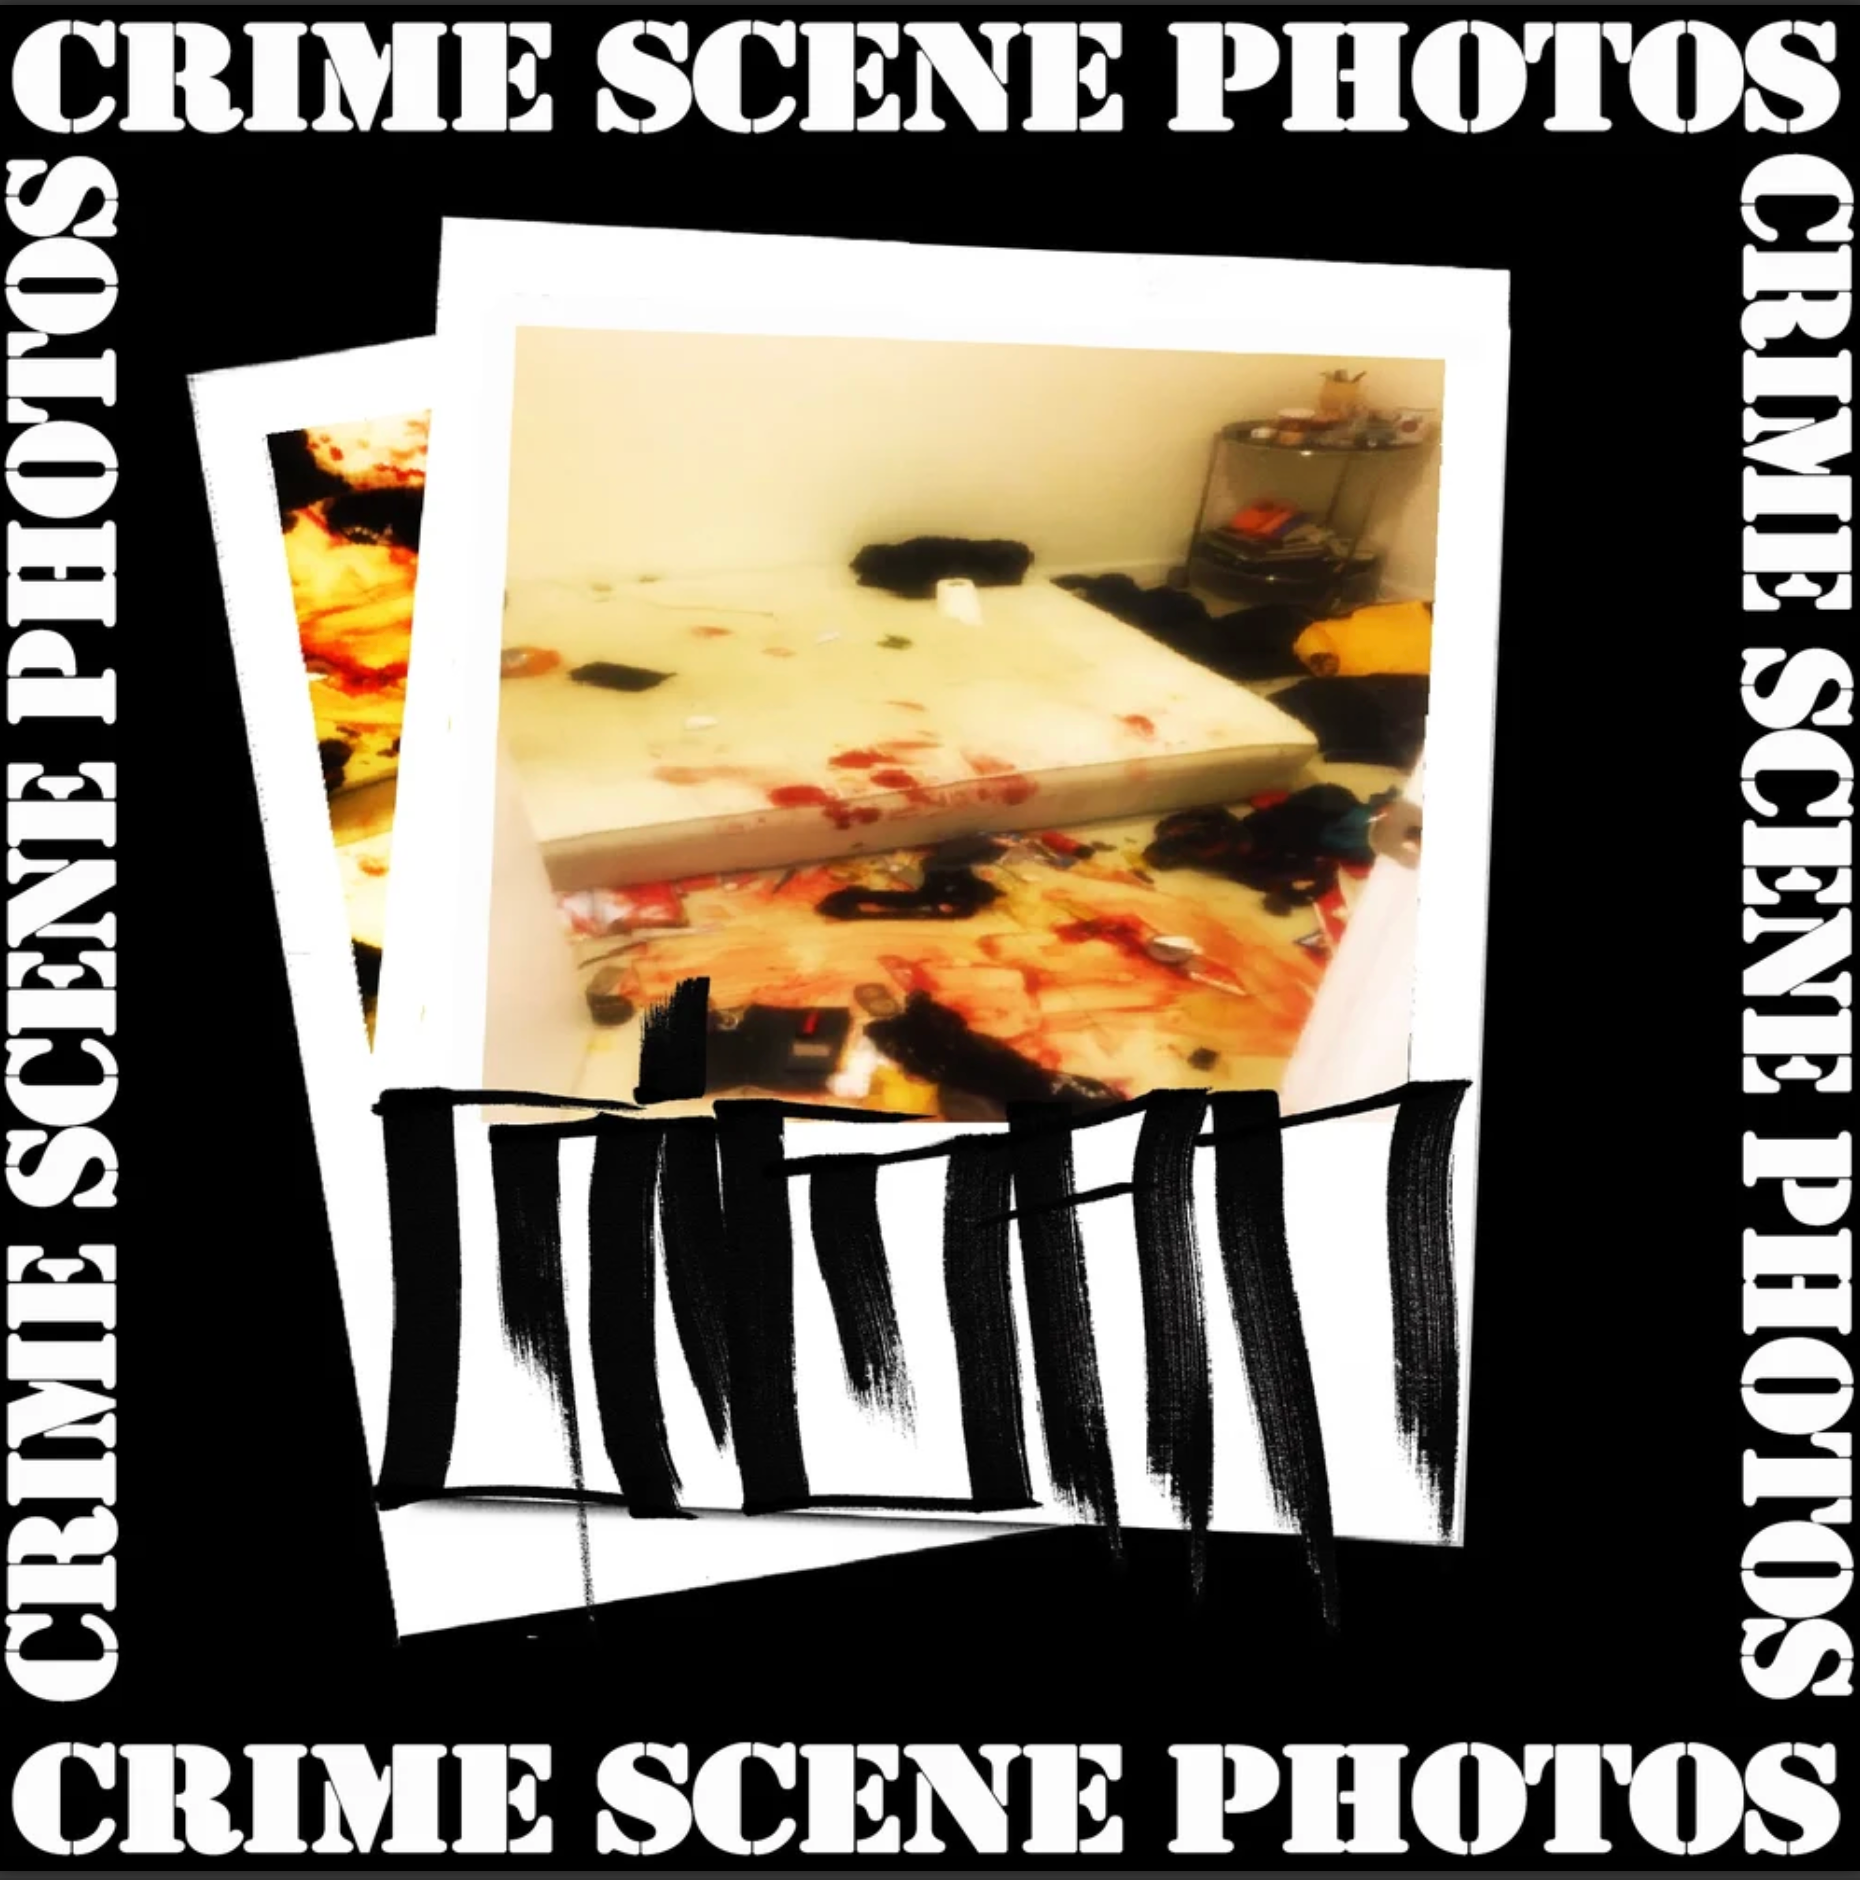 Gigan- Crime Scene Photos (Streets Of Hate)